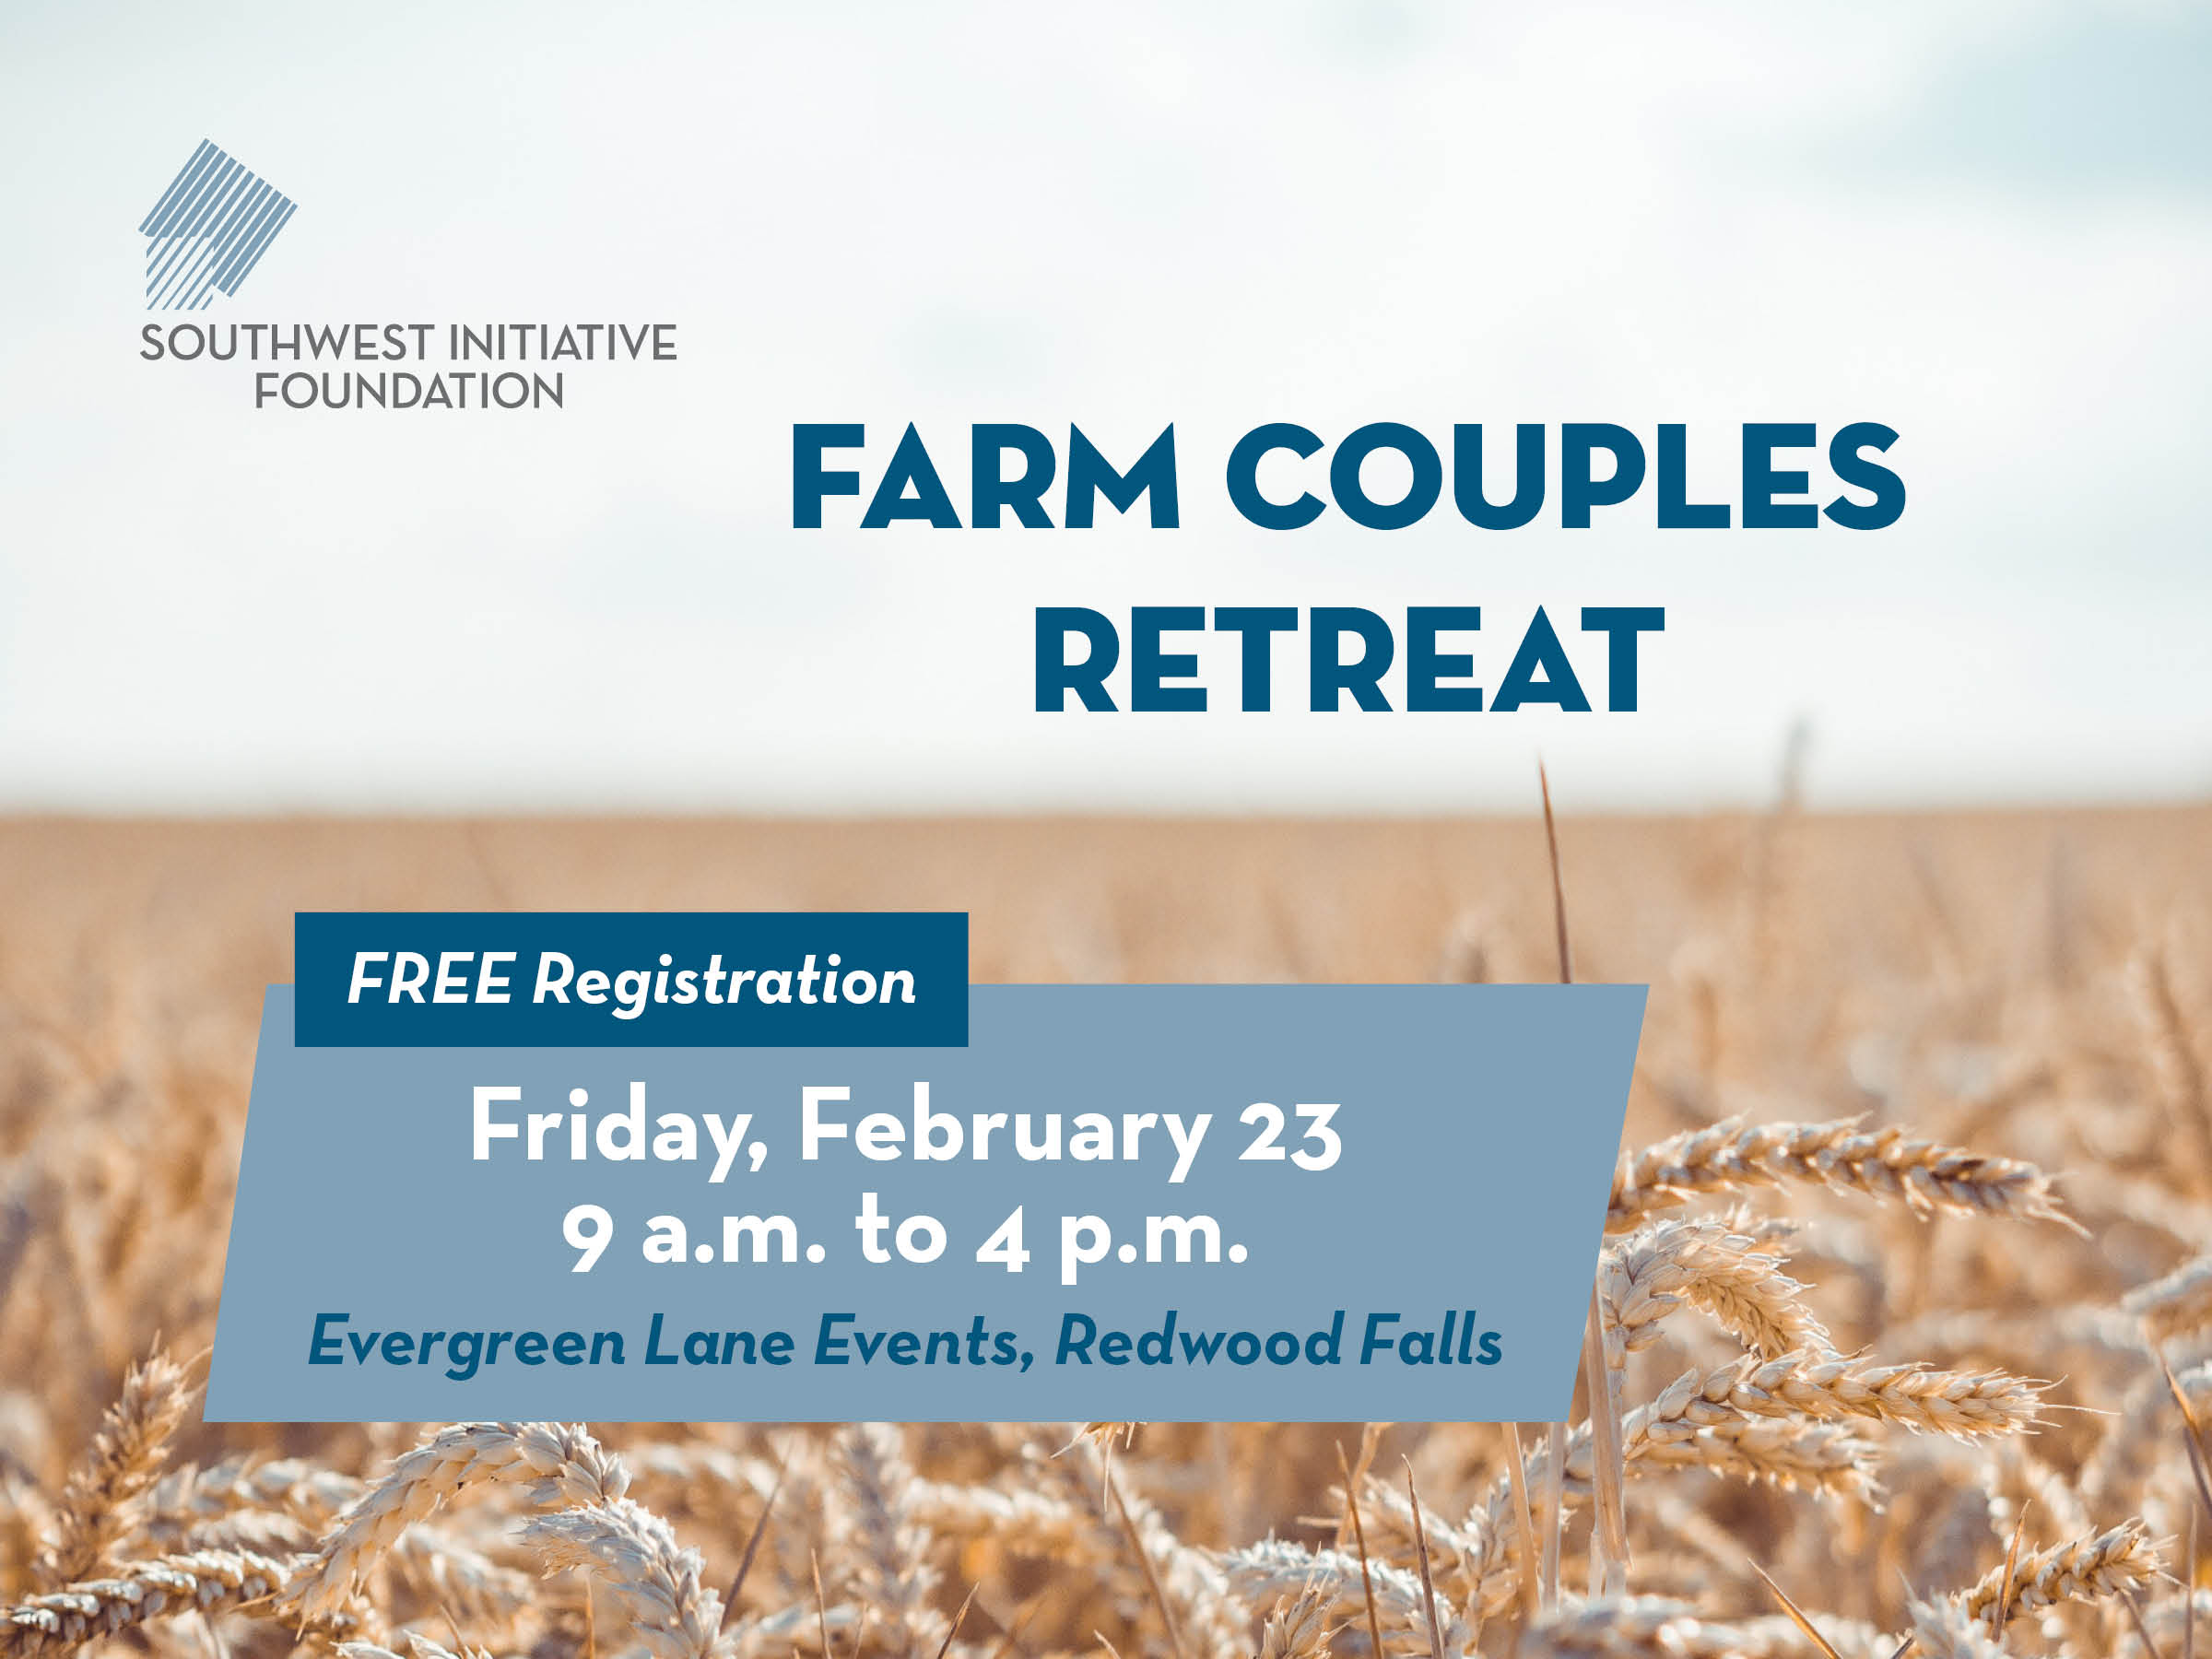 An image of a wheat field under gauzy clouds with the foundation's logo and the copy Farm Couples Retreat, free registration, Friday, February 23 9 a.m. to 4 p.m. Evergreen Lane Events, Redwood Falls